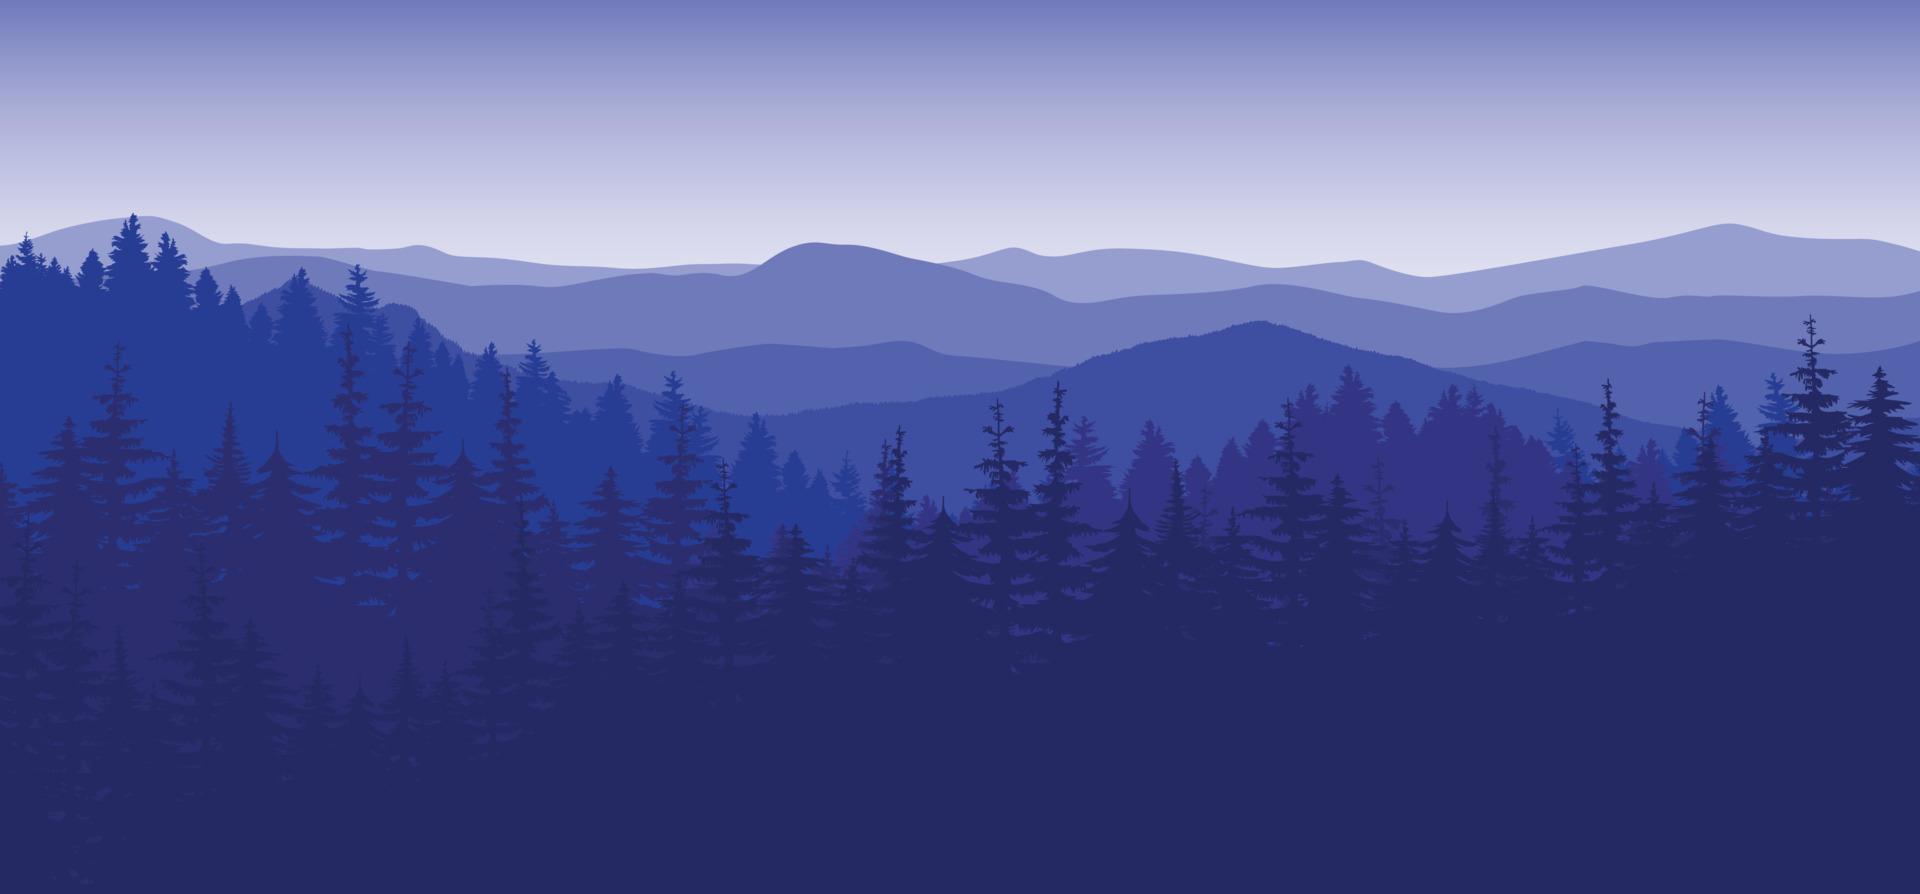 vector background with mountains mountain nature morning evening forest trees